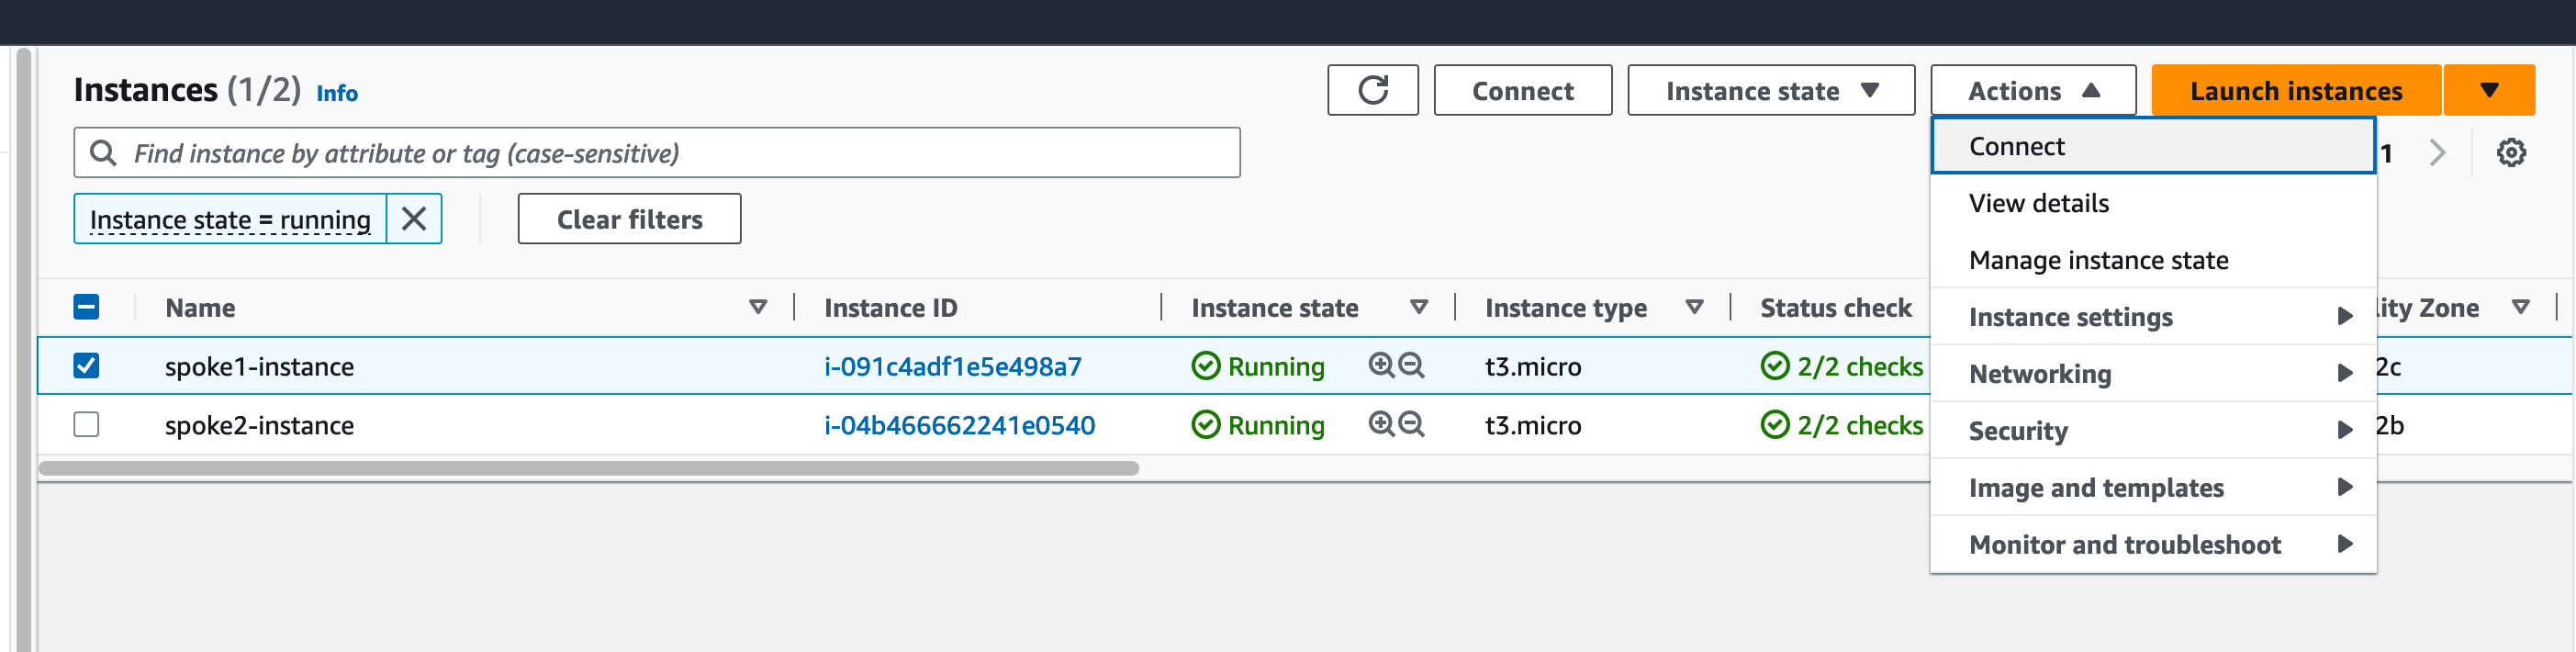 Screenshot of the AWS EC2 console listing instances with an instance selected and the Connect menu item selected